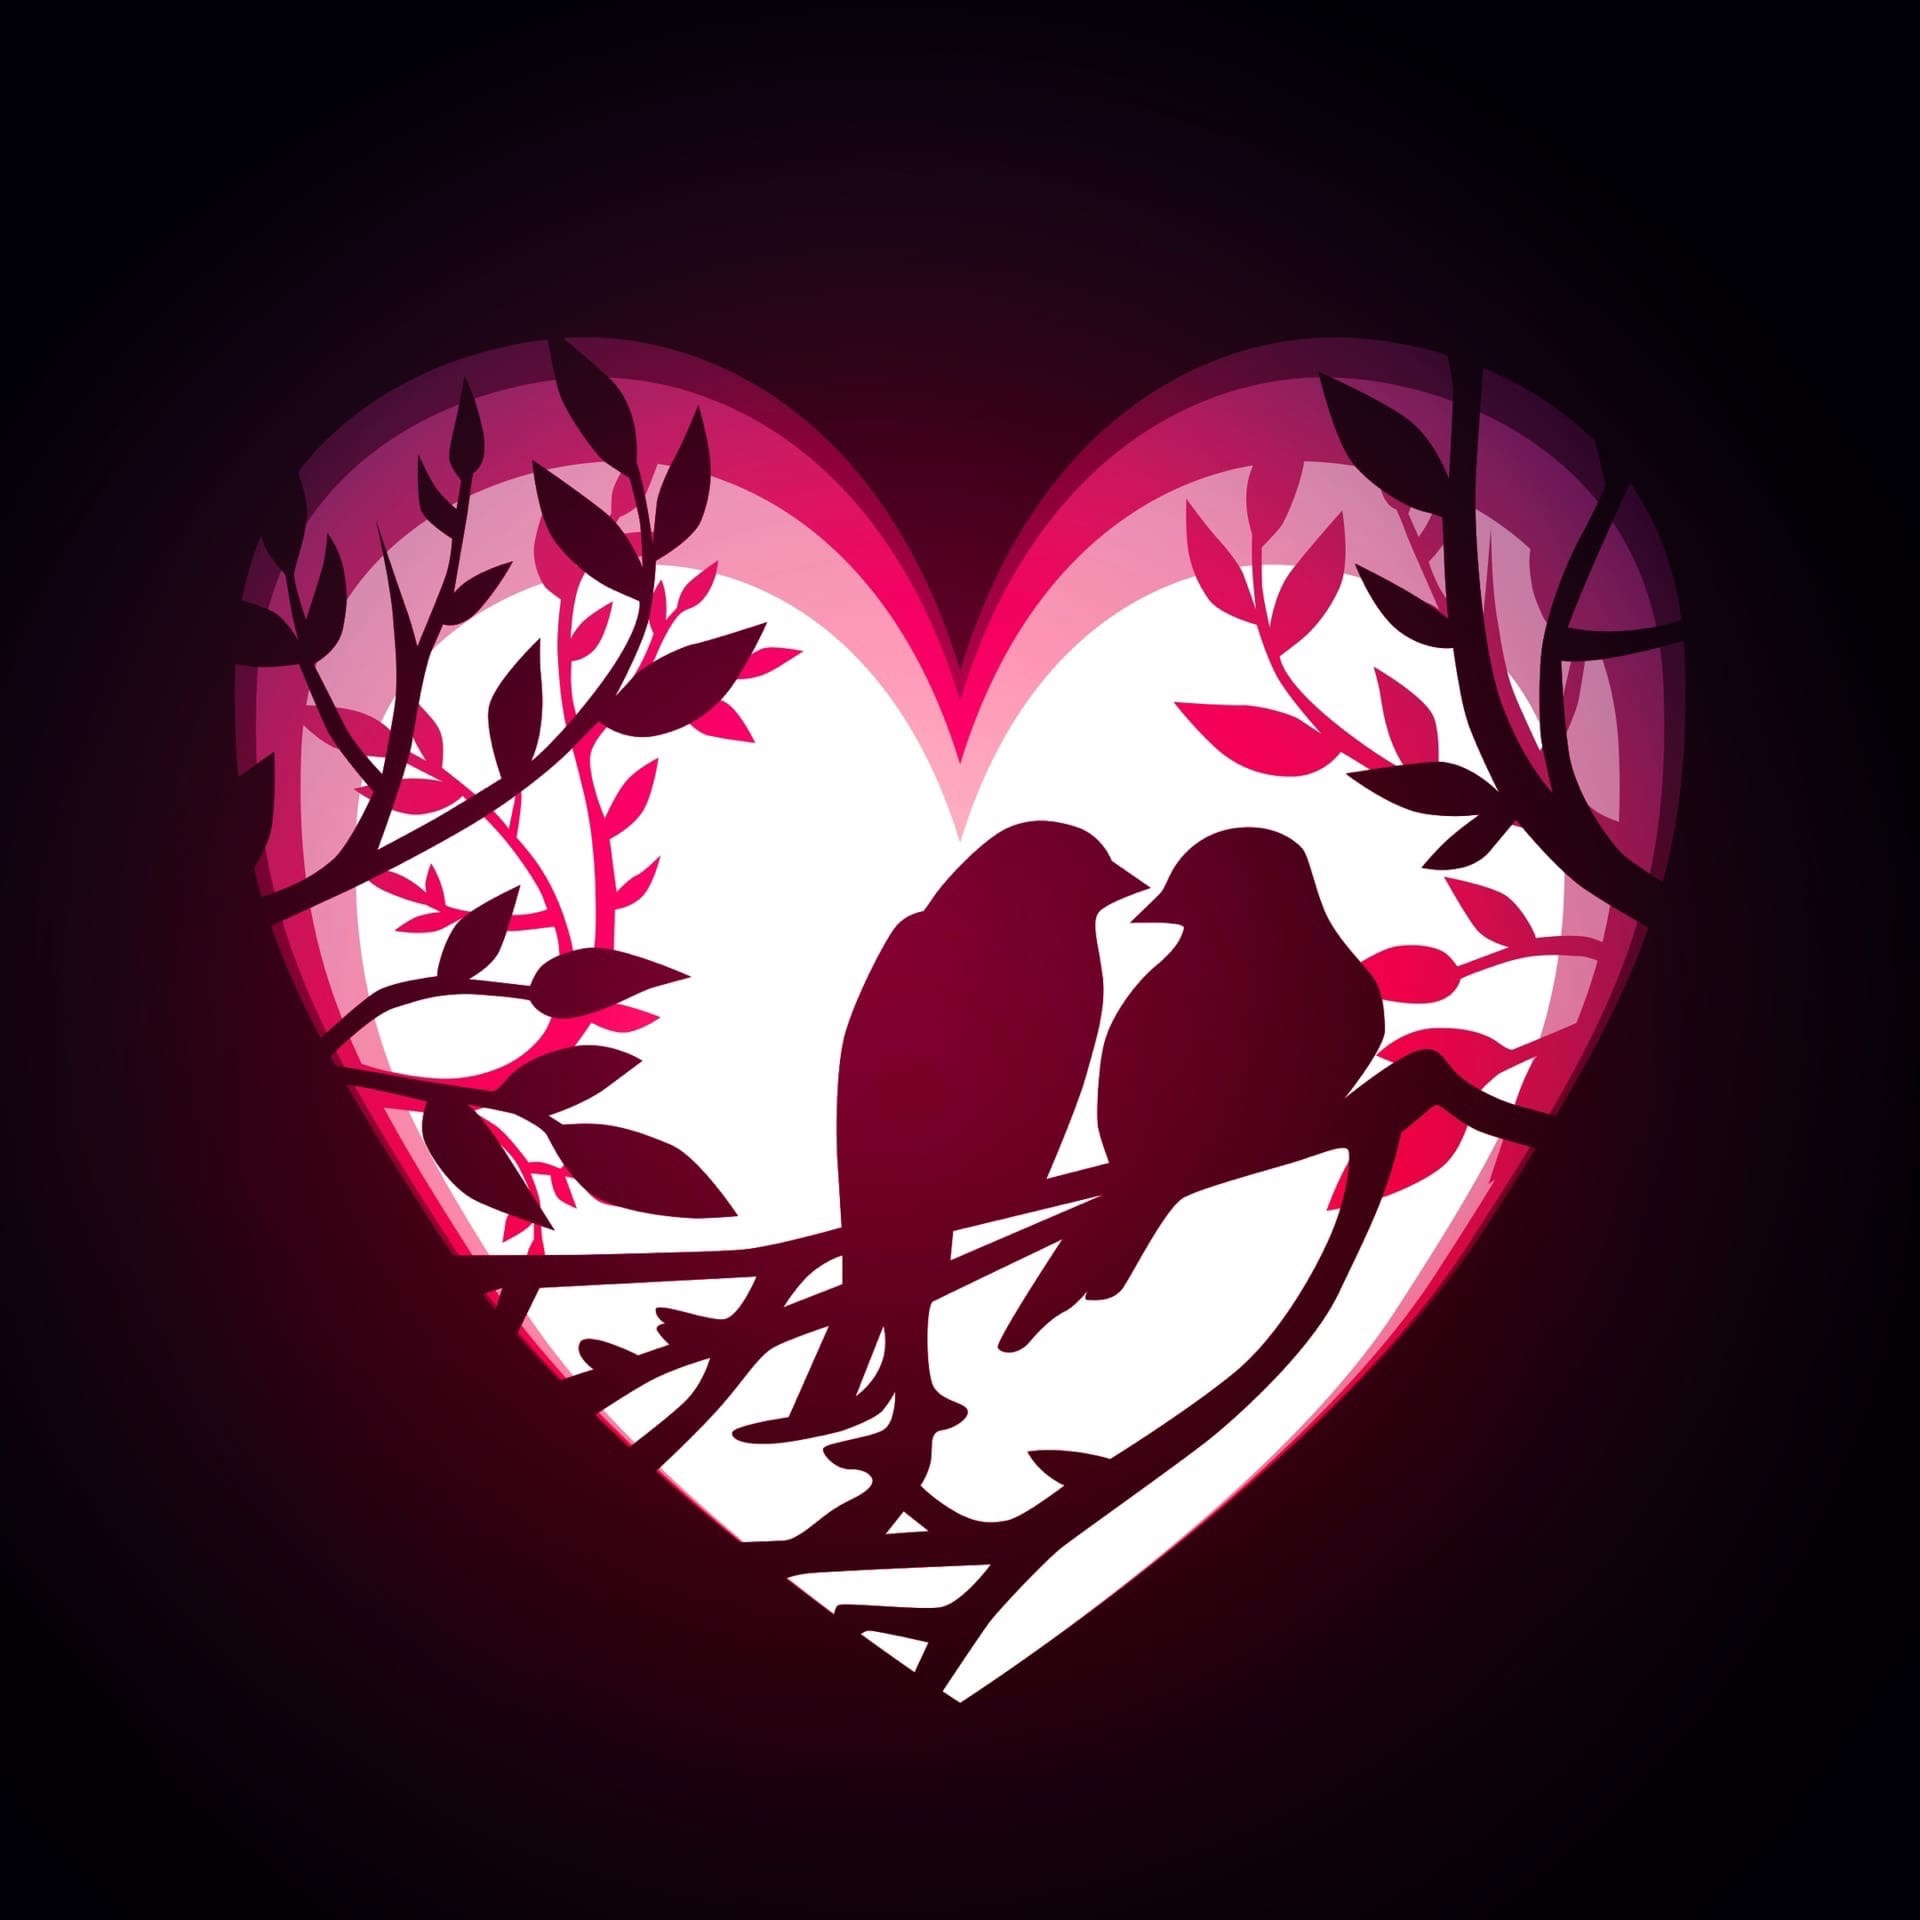 Love Birds Layered Decor For Laser Cutting Free DXF File